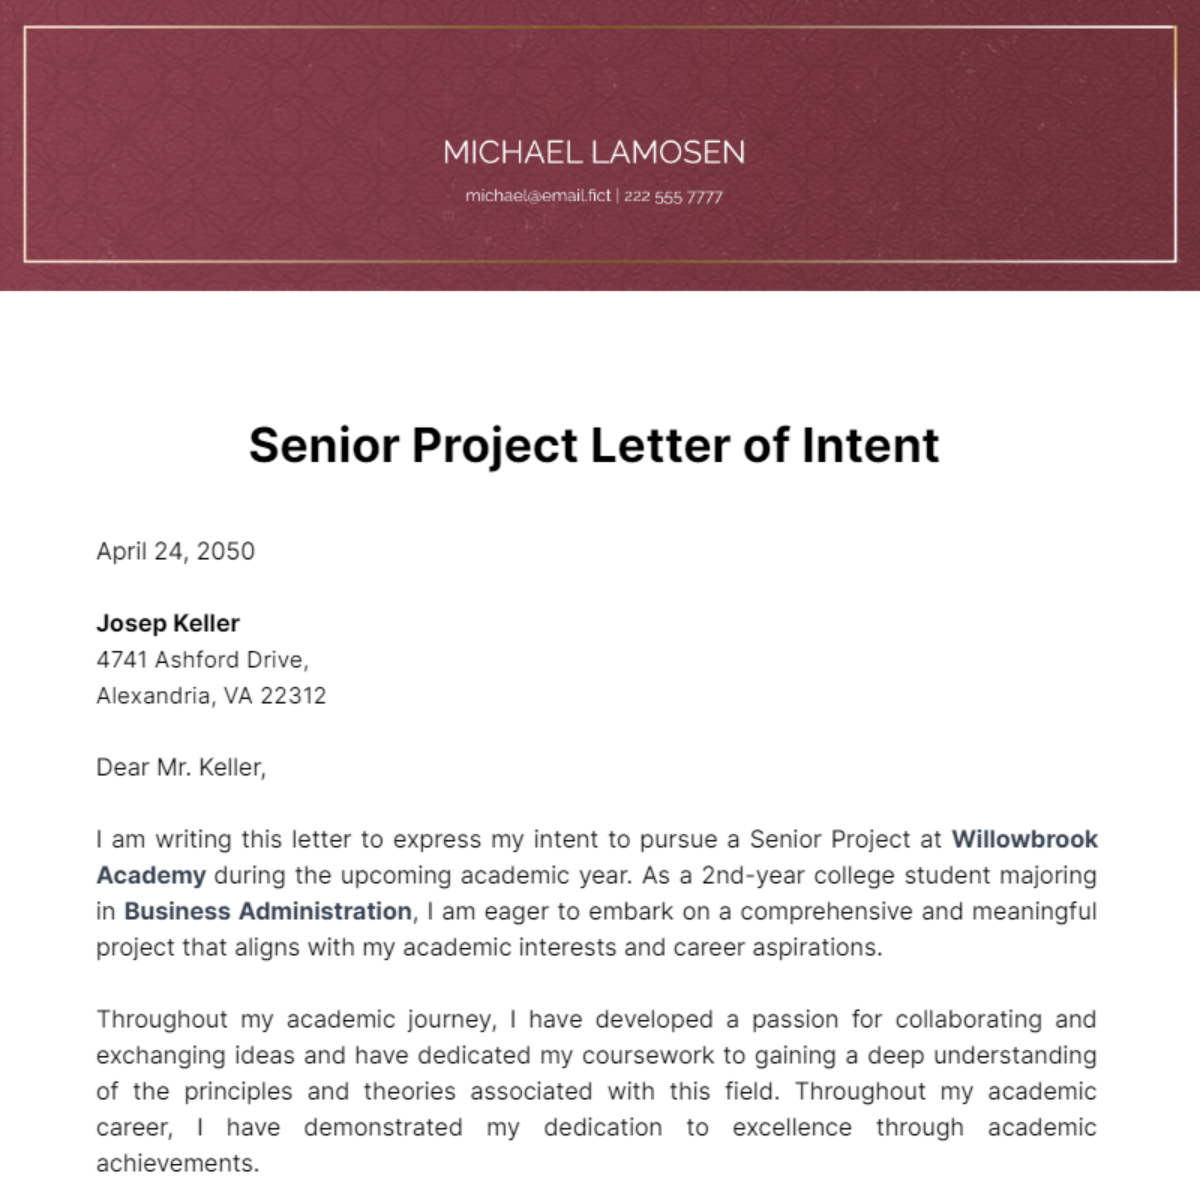 Senior Project Letter of Intent Template